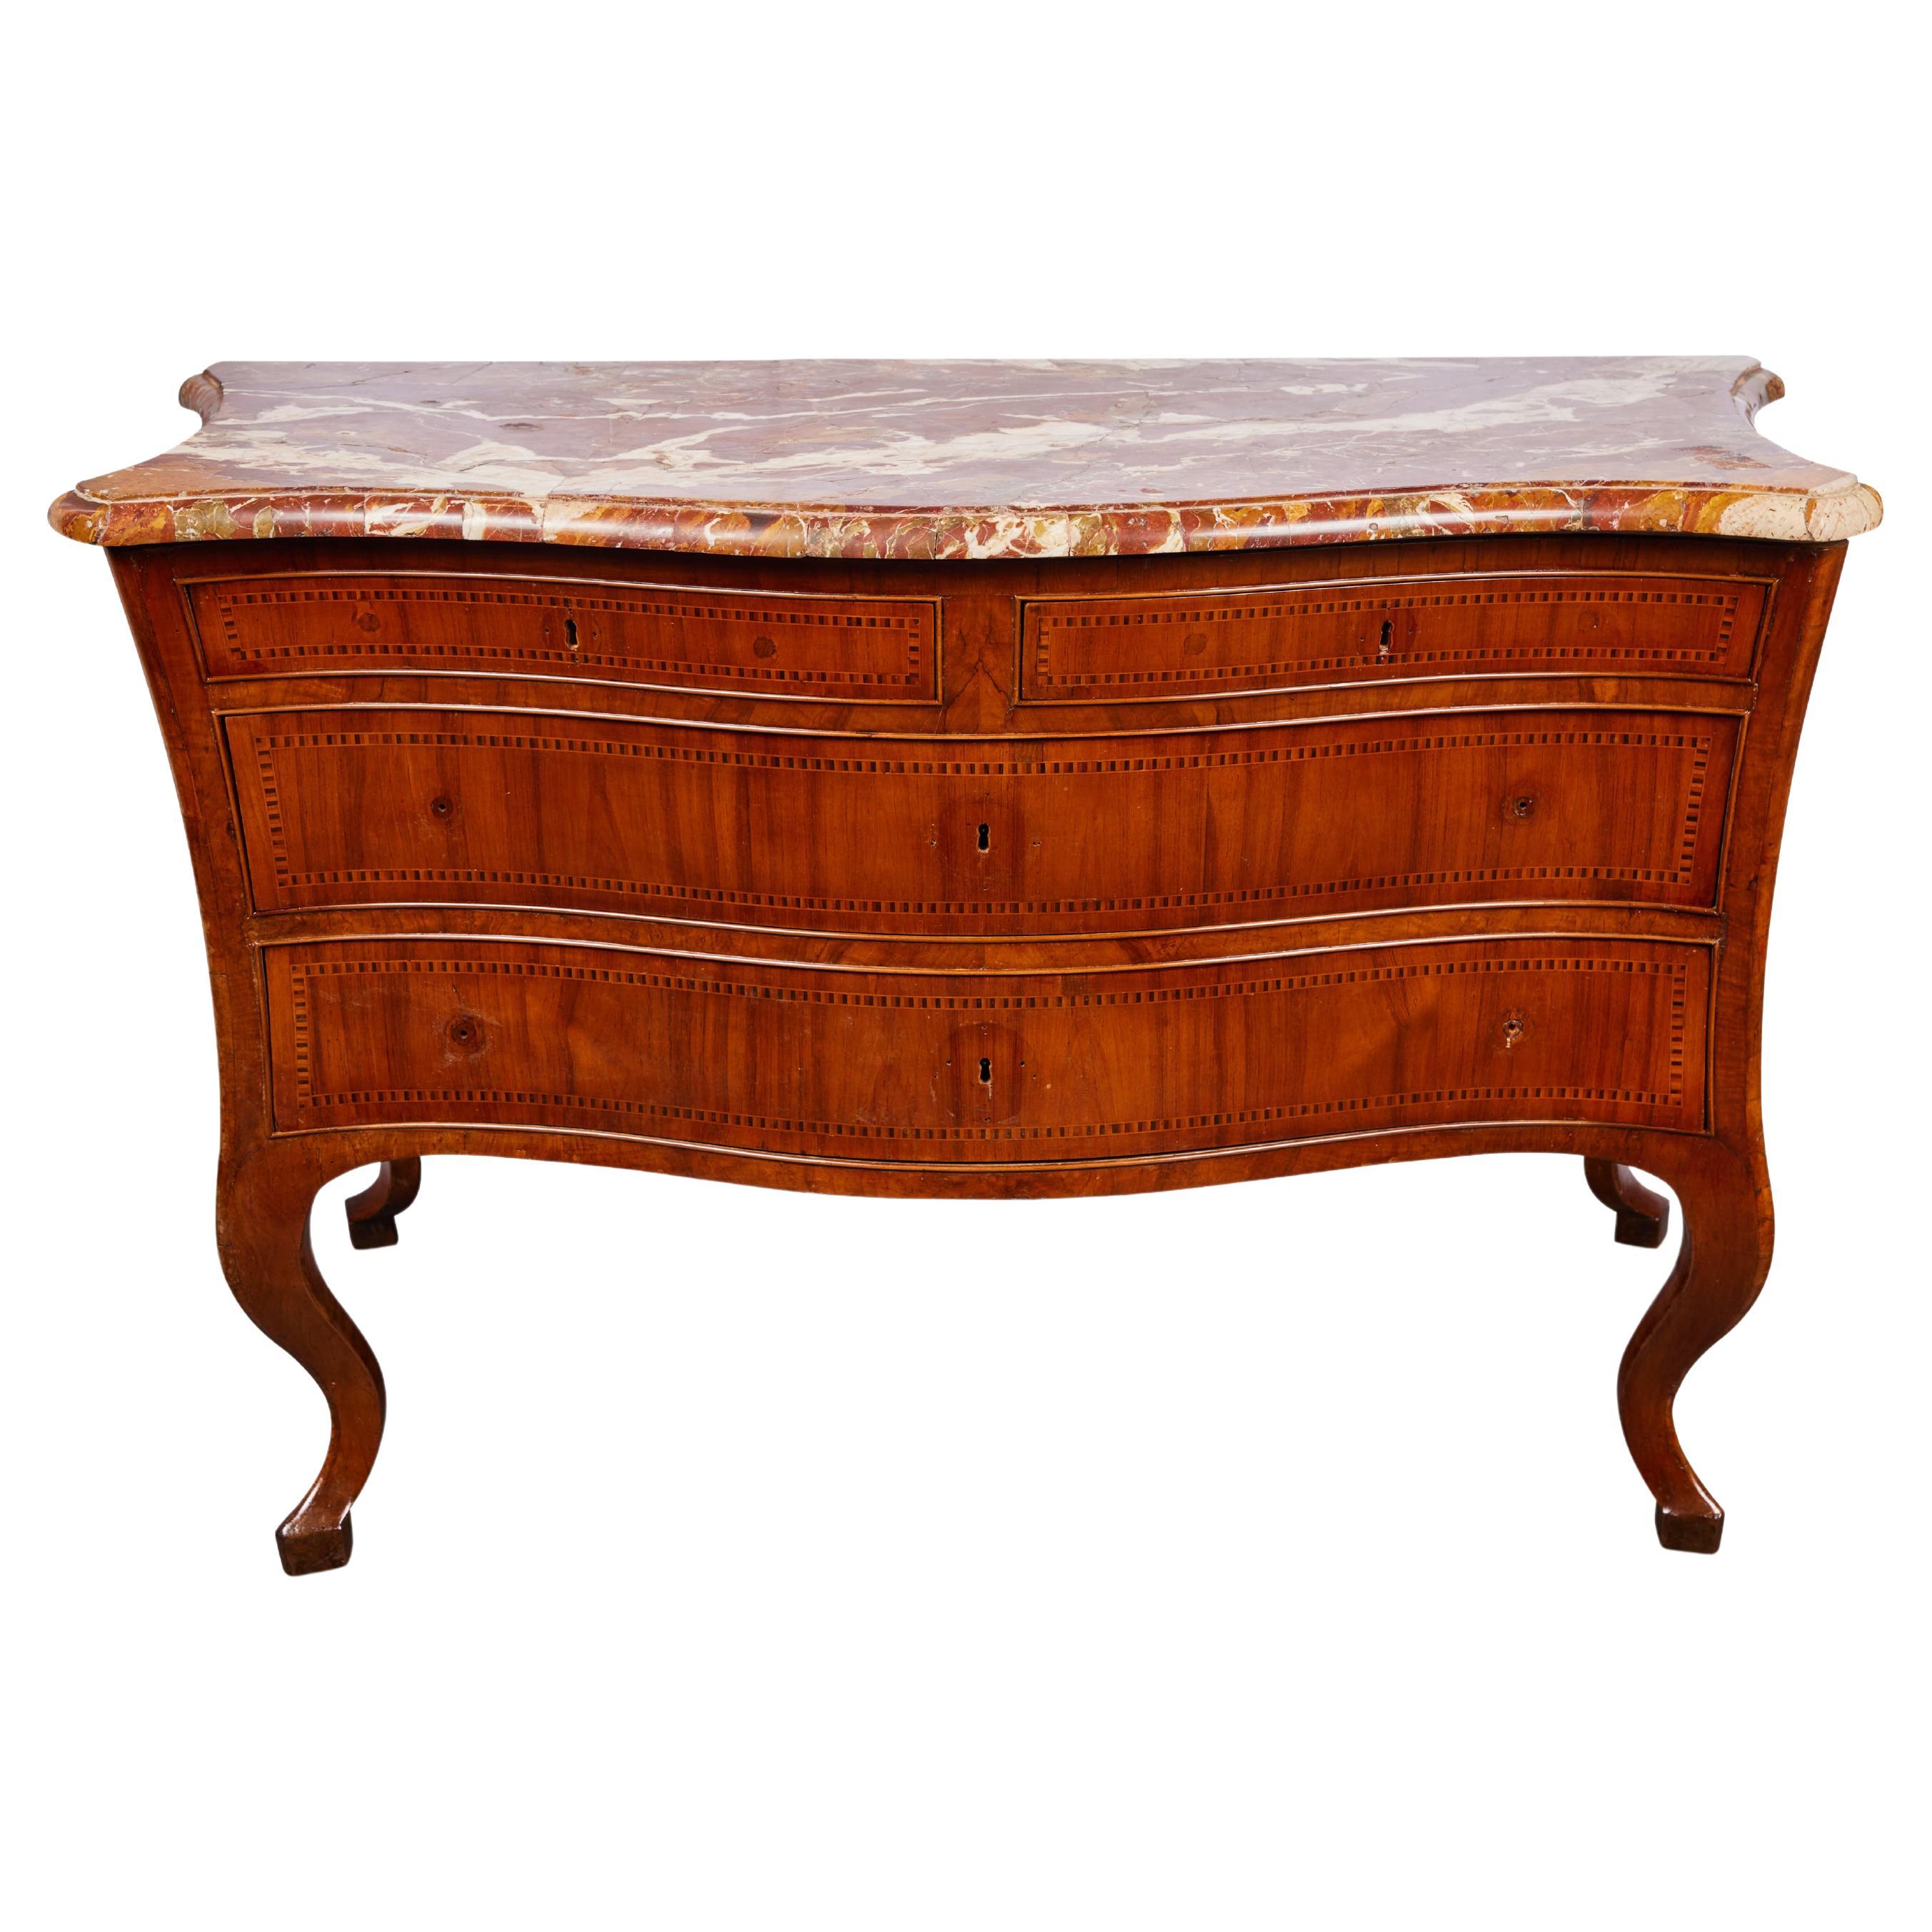 18th Century Cherry Wood Commode For Sale